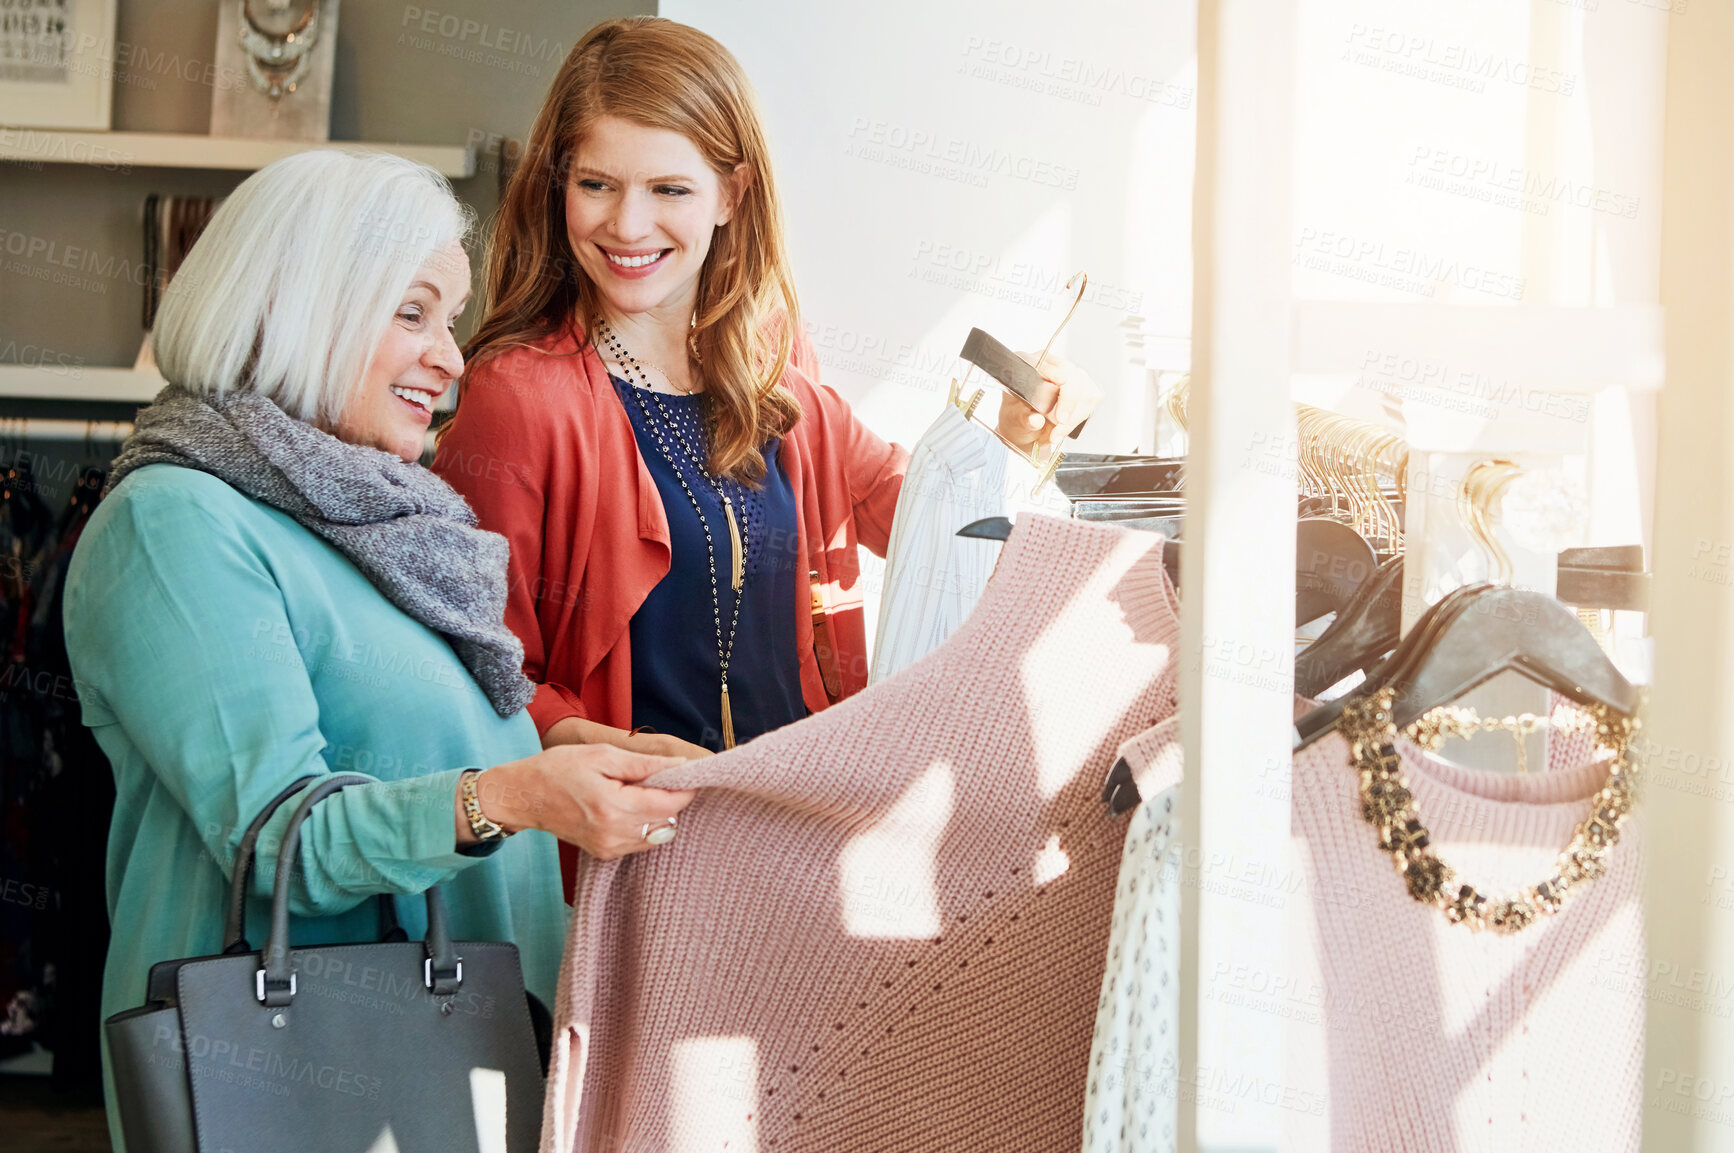 Buy stock photo Shot of a mother and daughter shopping in a clothing store